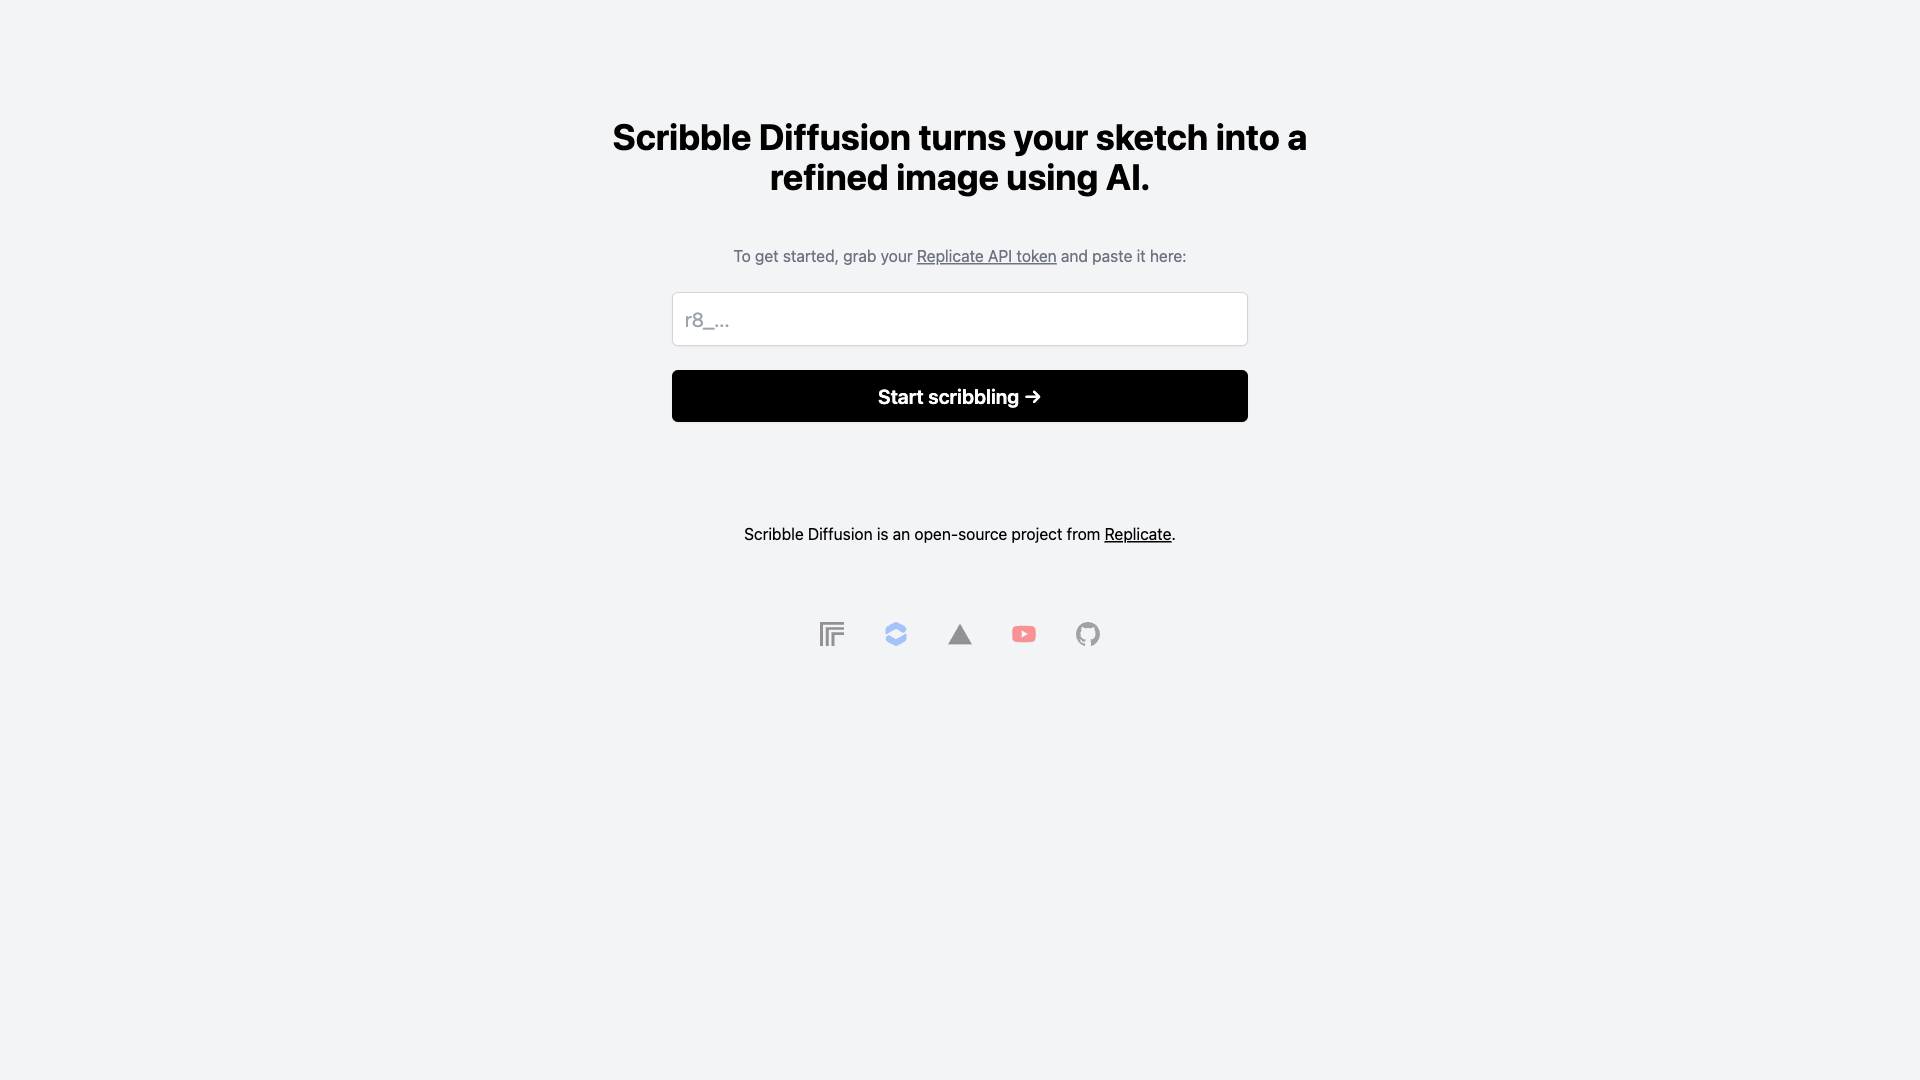 Display image for Scribble Diffusion